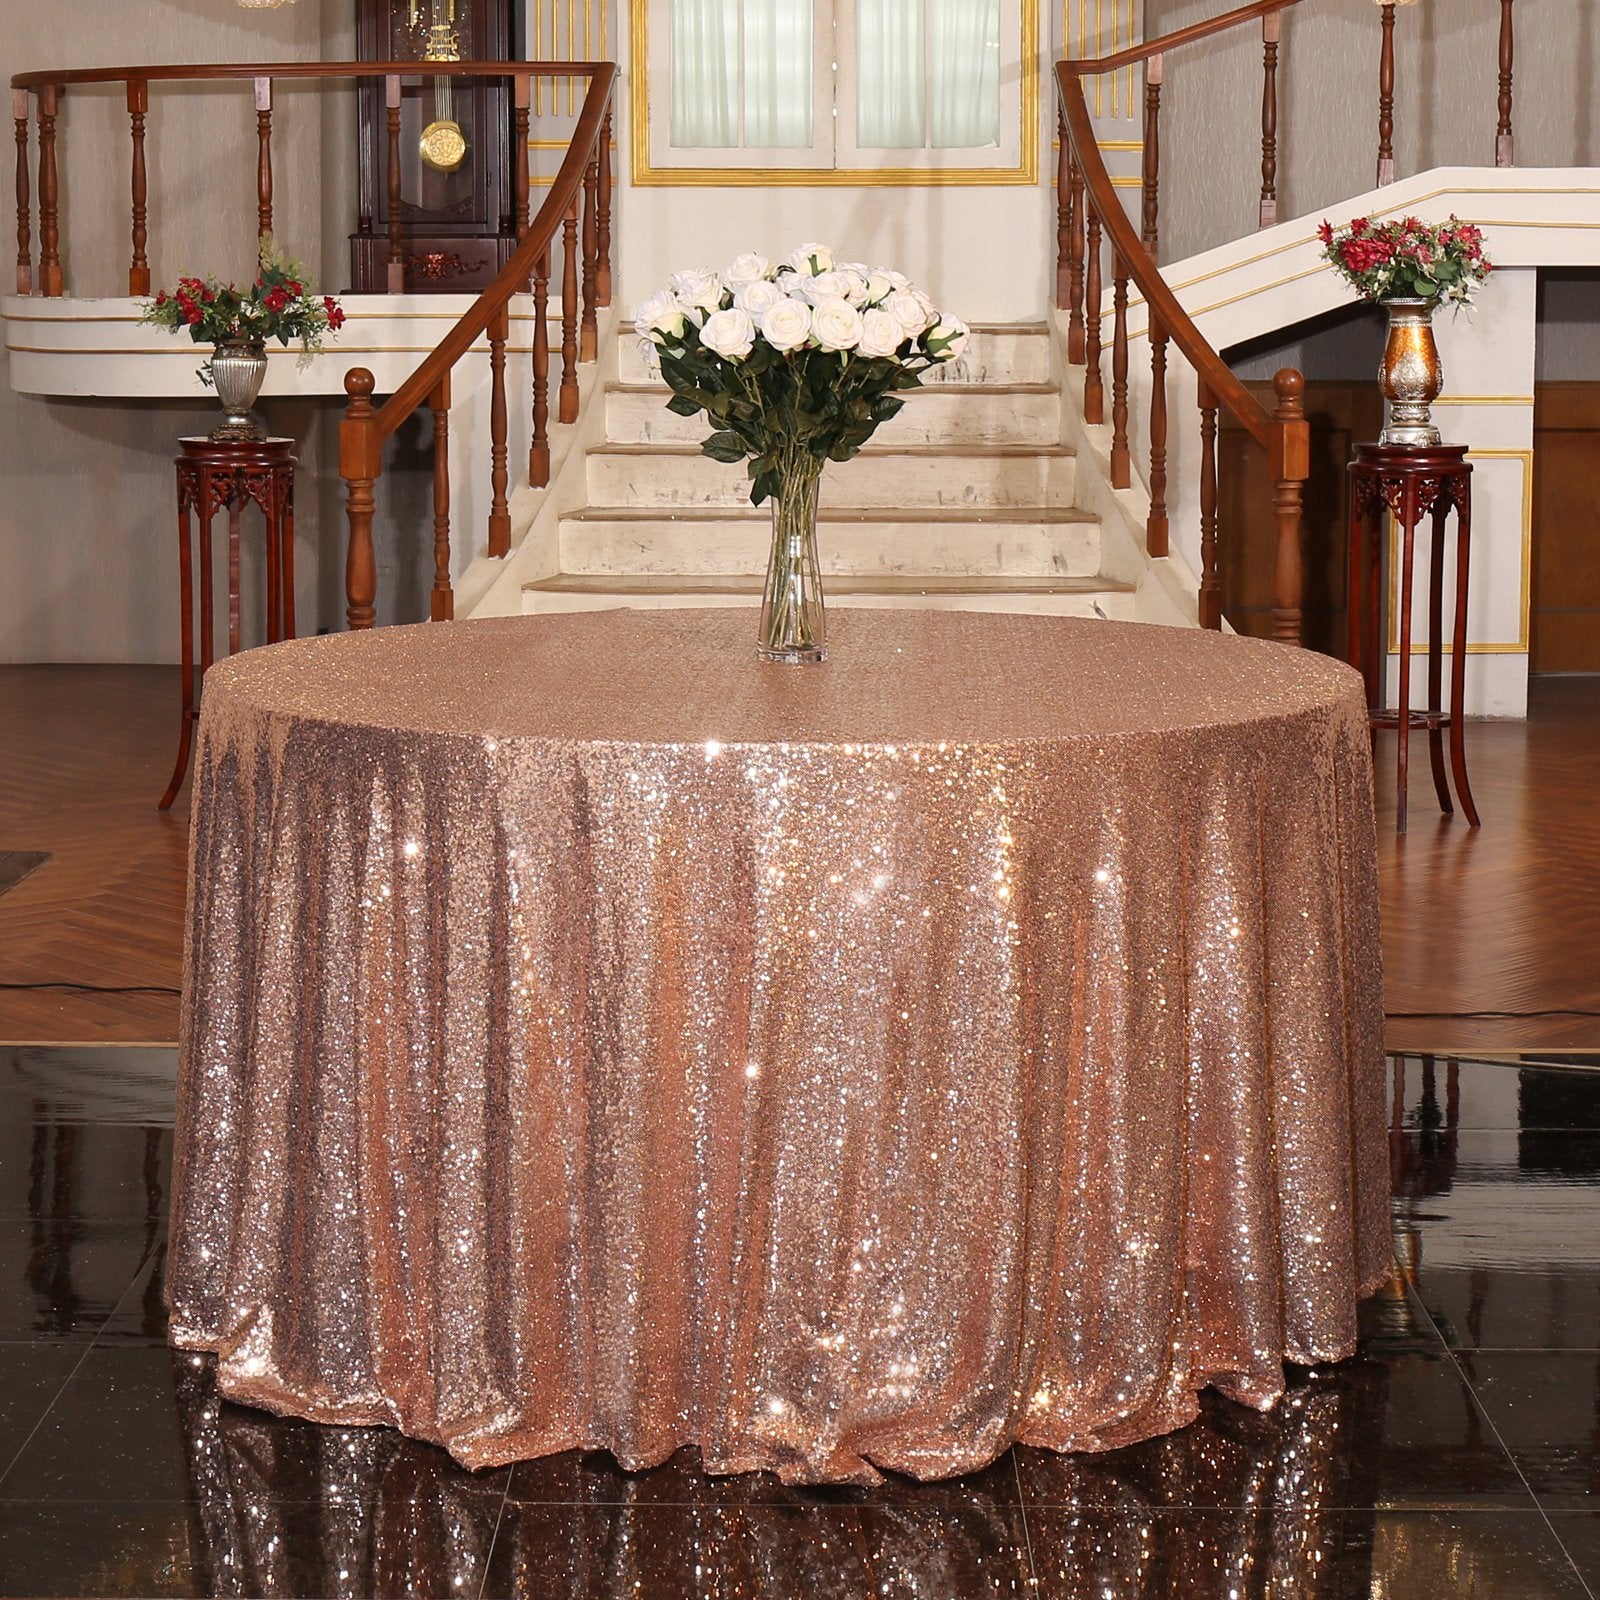 3E Home 127cm(50" inches) Round Tablecloth Rose Gold Sequin Table Cloth Wedding Party Sequin Table Cloth Round Glitz Rose Gold Tablecloths Gauze Sparkly Decoration